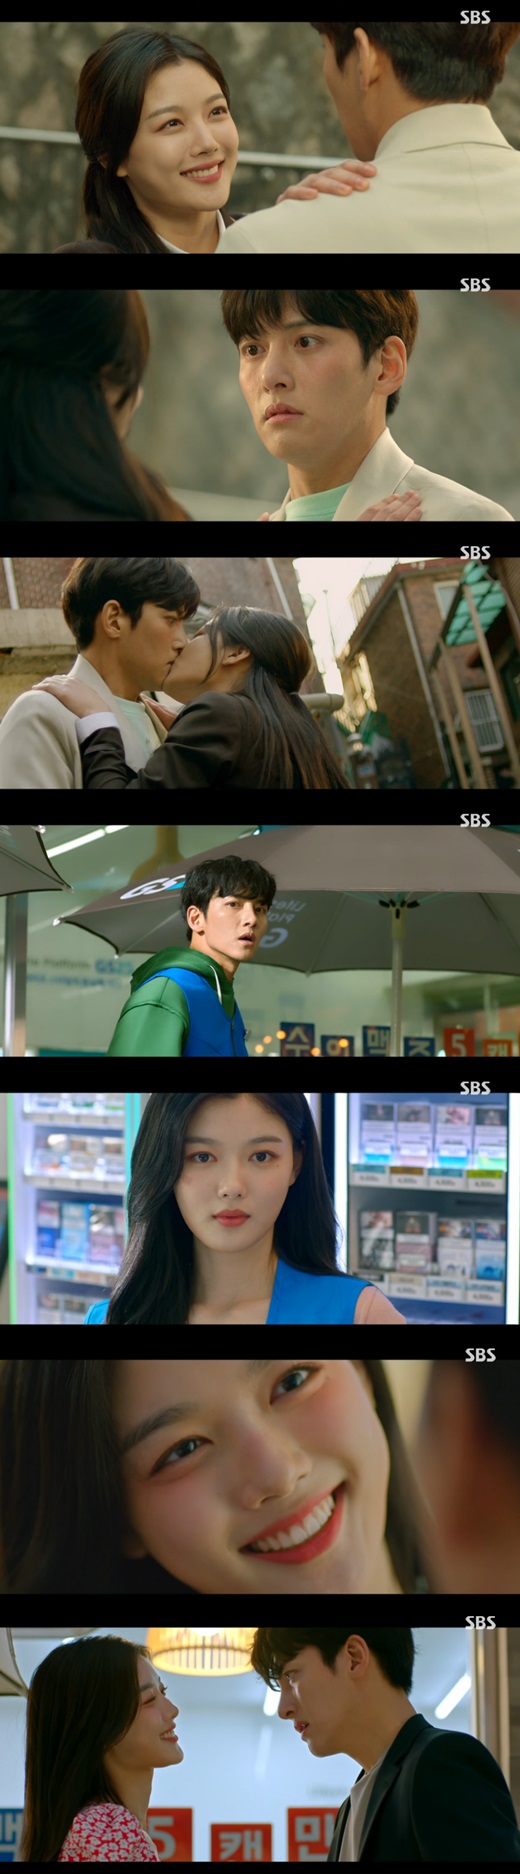 Ji Chang-wook and Kim Yoo-jung have a relationship in Convenience store.In the SBS new gilt drama Convenience store morning star which was first broadcast on the 19th, the first meeting of Choi Dae-heon (Ji Chang-wook) and Kim Yoo-jung was drawn.Choi Dae-heon is a full-bodied but heartwarming man who is late for an appointment with GFriend to save a cat at risk on the side of the road.GFriend said, My brother is a good person, a really good person, but he does not fit with me. Choi Dae-heon said, No.We fit well, but GFriend returned all the gifts he received and left.The star asked Choi Dae-heon to buy a cigarette, but he did not listen to Choi Dae-heon.So the star suddenly kissed Choi Dae-heon and said, This is my concern. It is my first time that I have told you to quit smoking.Then, the star took the number of Choi Dae-heon and said, Be careful, brother, I do not know what to do with my brother.Three years later, Choi Dae-heon was interviewed by the star in the Convenience store where he was the manager.Choi Dae-heon remembered him and tried to stay away as far as possible, but eventually he hired Alvaro.Choi Dae-heon then suspected the star of the star when he found out that the money was missing from the safe. Thats what my mother took.I do not listen to my story, but I judge it freely. Choi Dae-heon went on a date with GFriend Yoo Yeon-ju (Han Seon-hwa), and Jeong Sae-byeol continued to show his favor toward Choi Dae-heon.